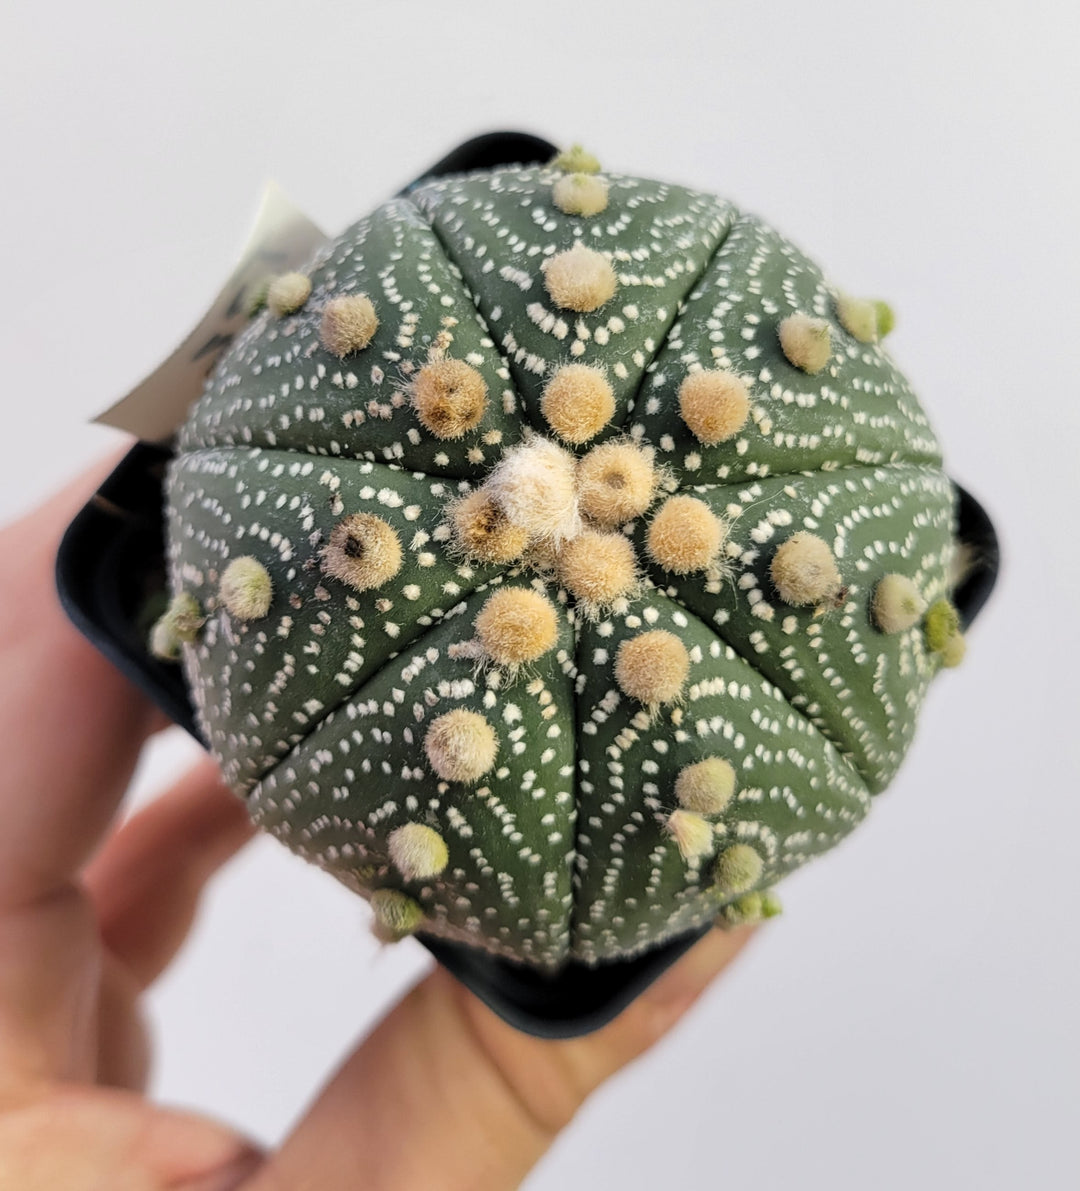 Astrophytum asterias cv. Superkabuto, rooted and established Deaw Cactus- Flowering Seed Grown #T32 - Nice Plants Good Pots